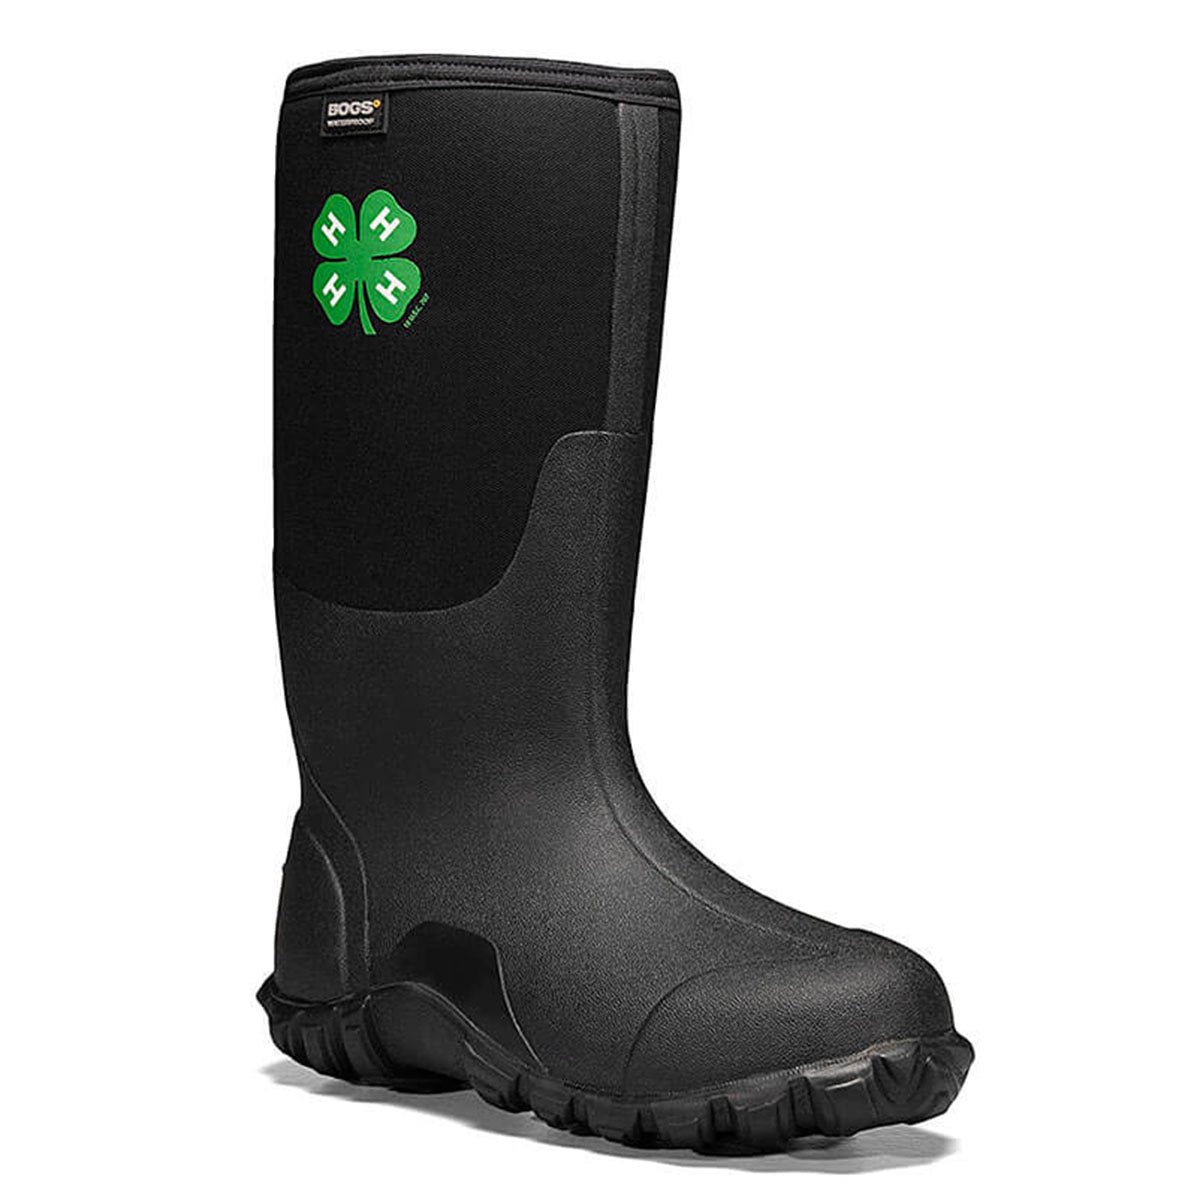 Sentence with replacement: Black Bogs Classic Tall 4H men's boot with waterproof insulation and eco-friendly symbols on the upper shaft.